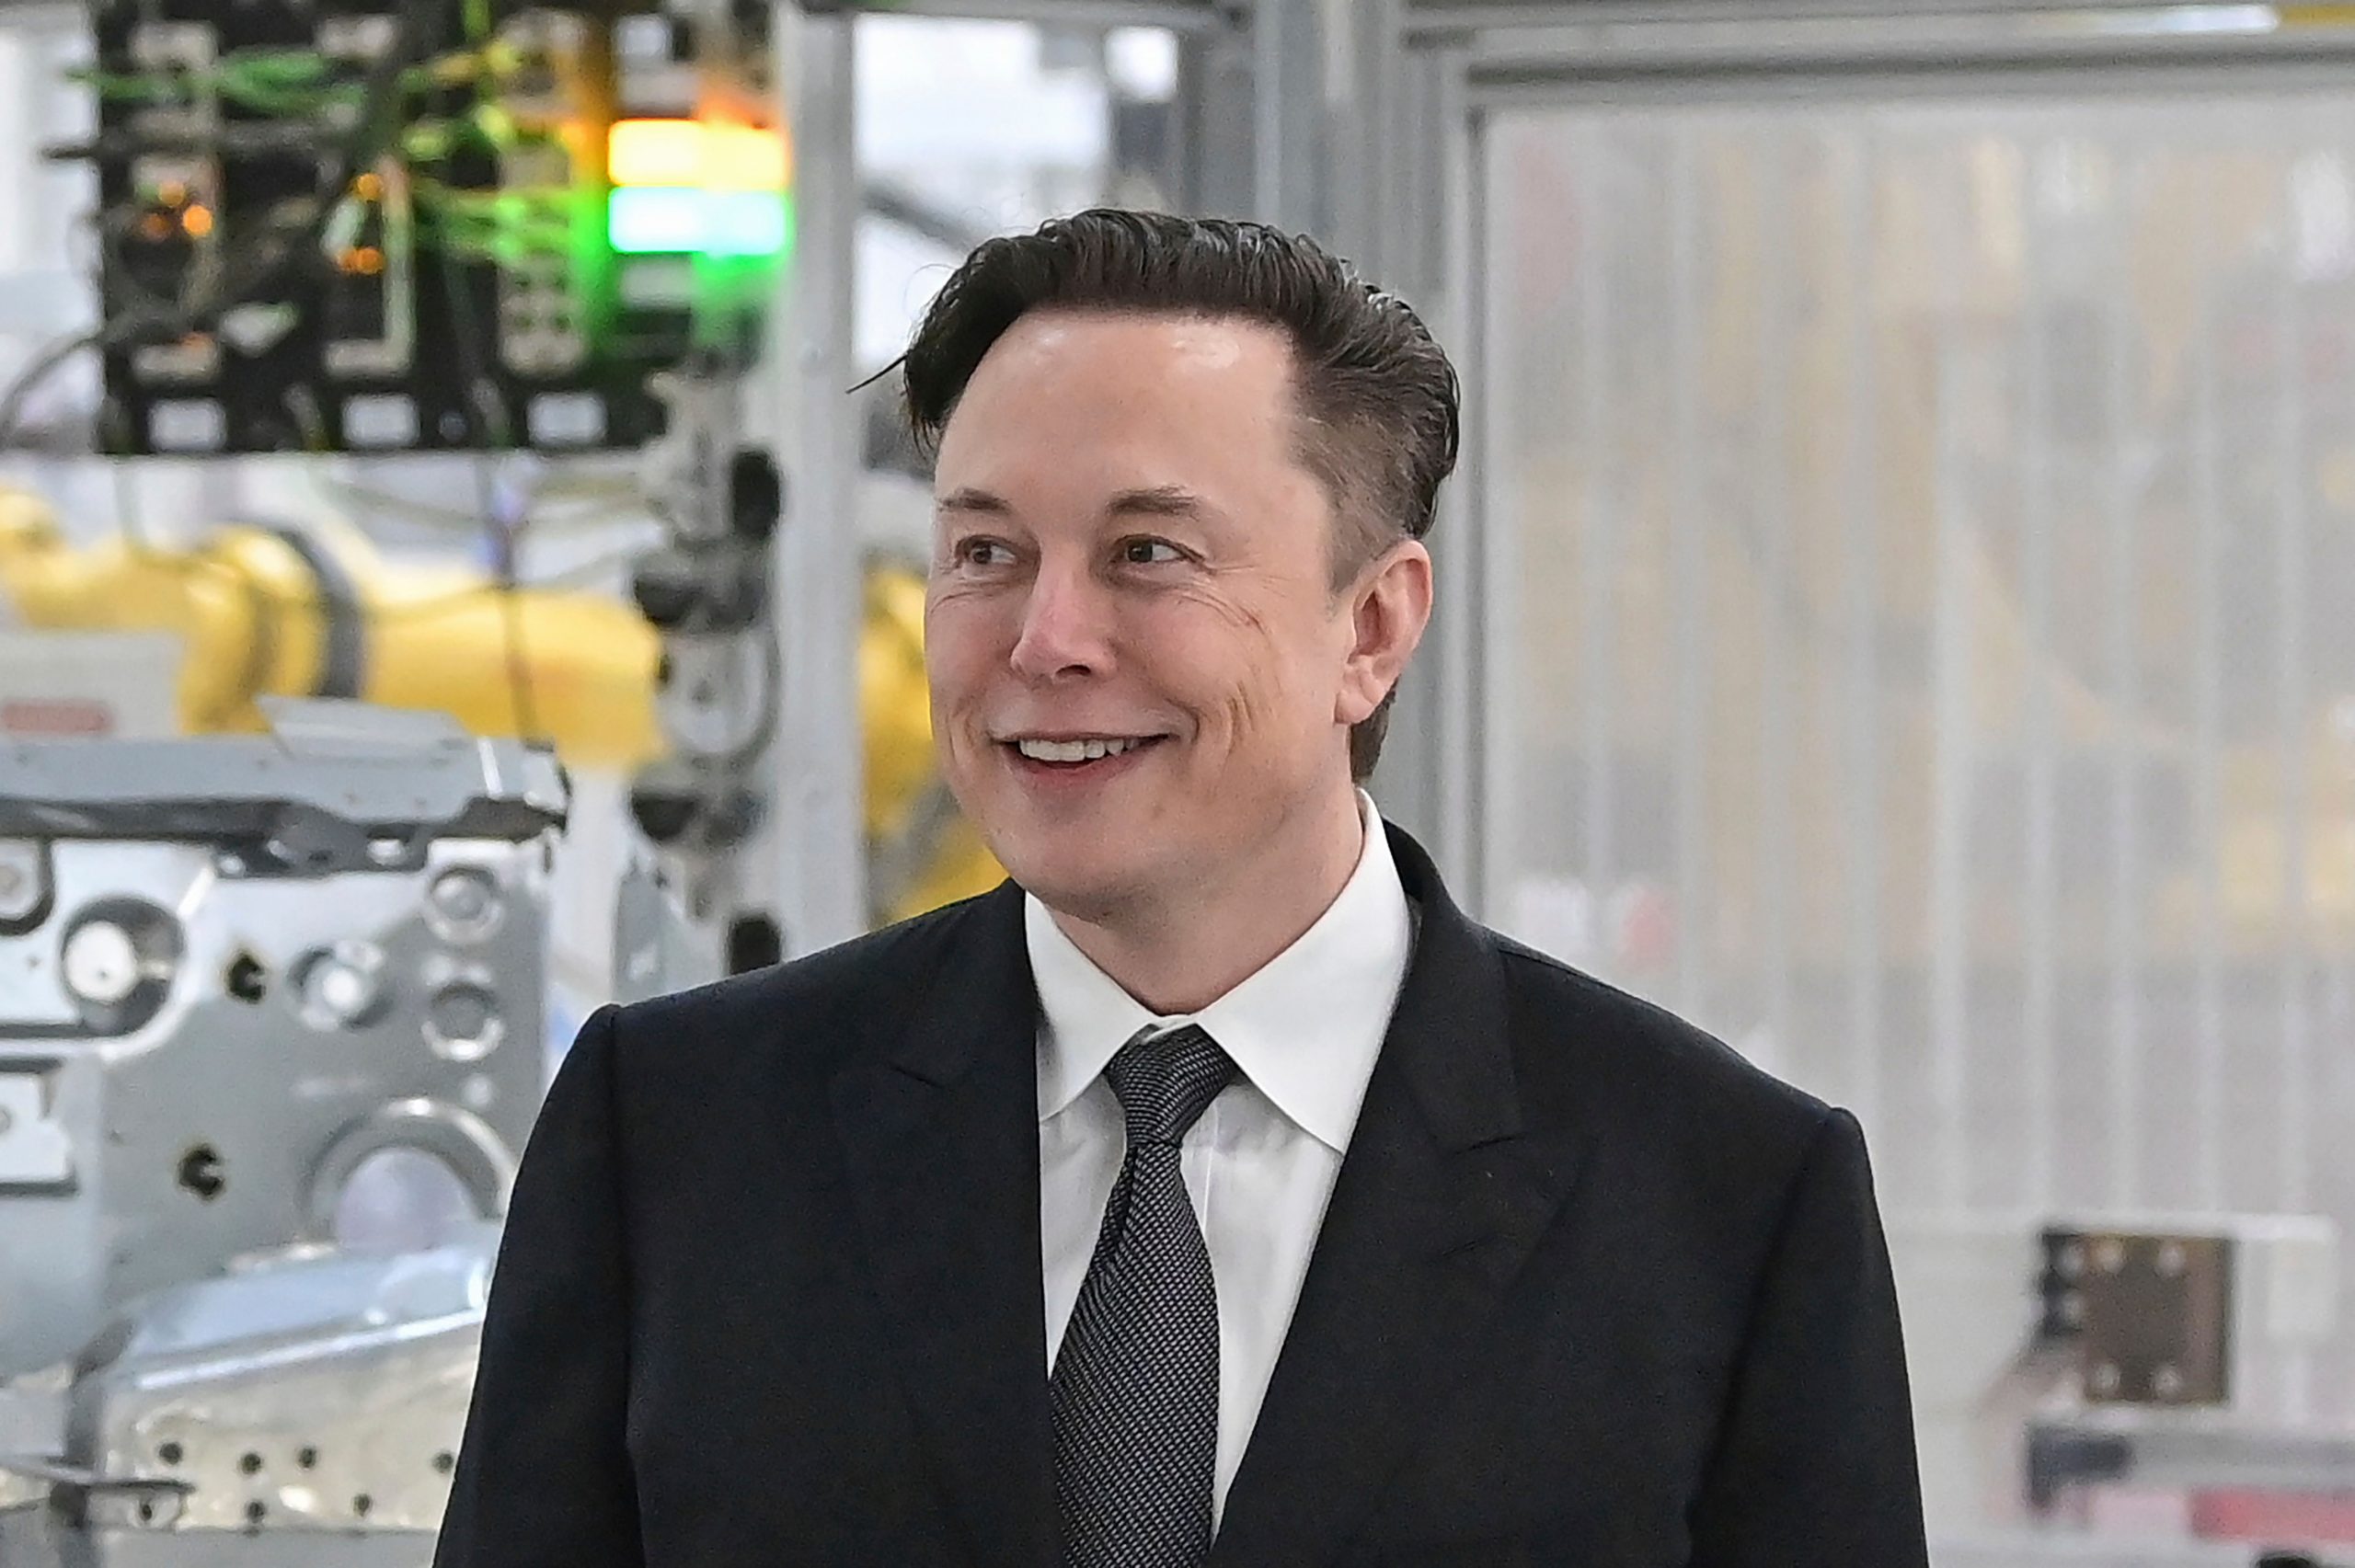 Fitter, happier and more deductive? Elon Musk suggests intermittent fasting